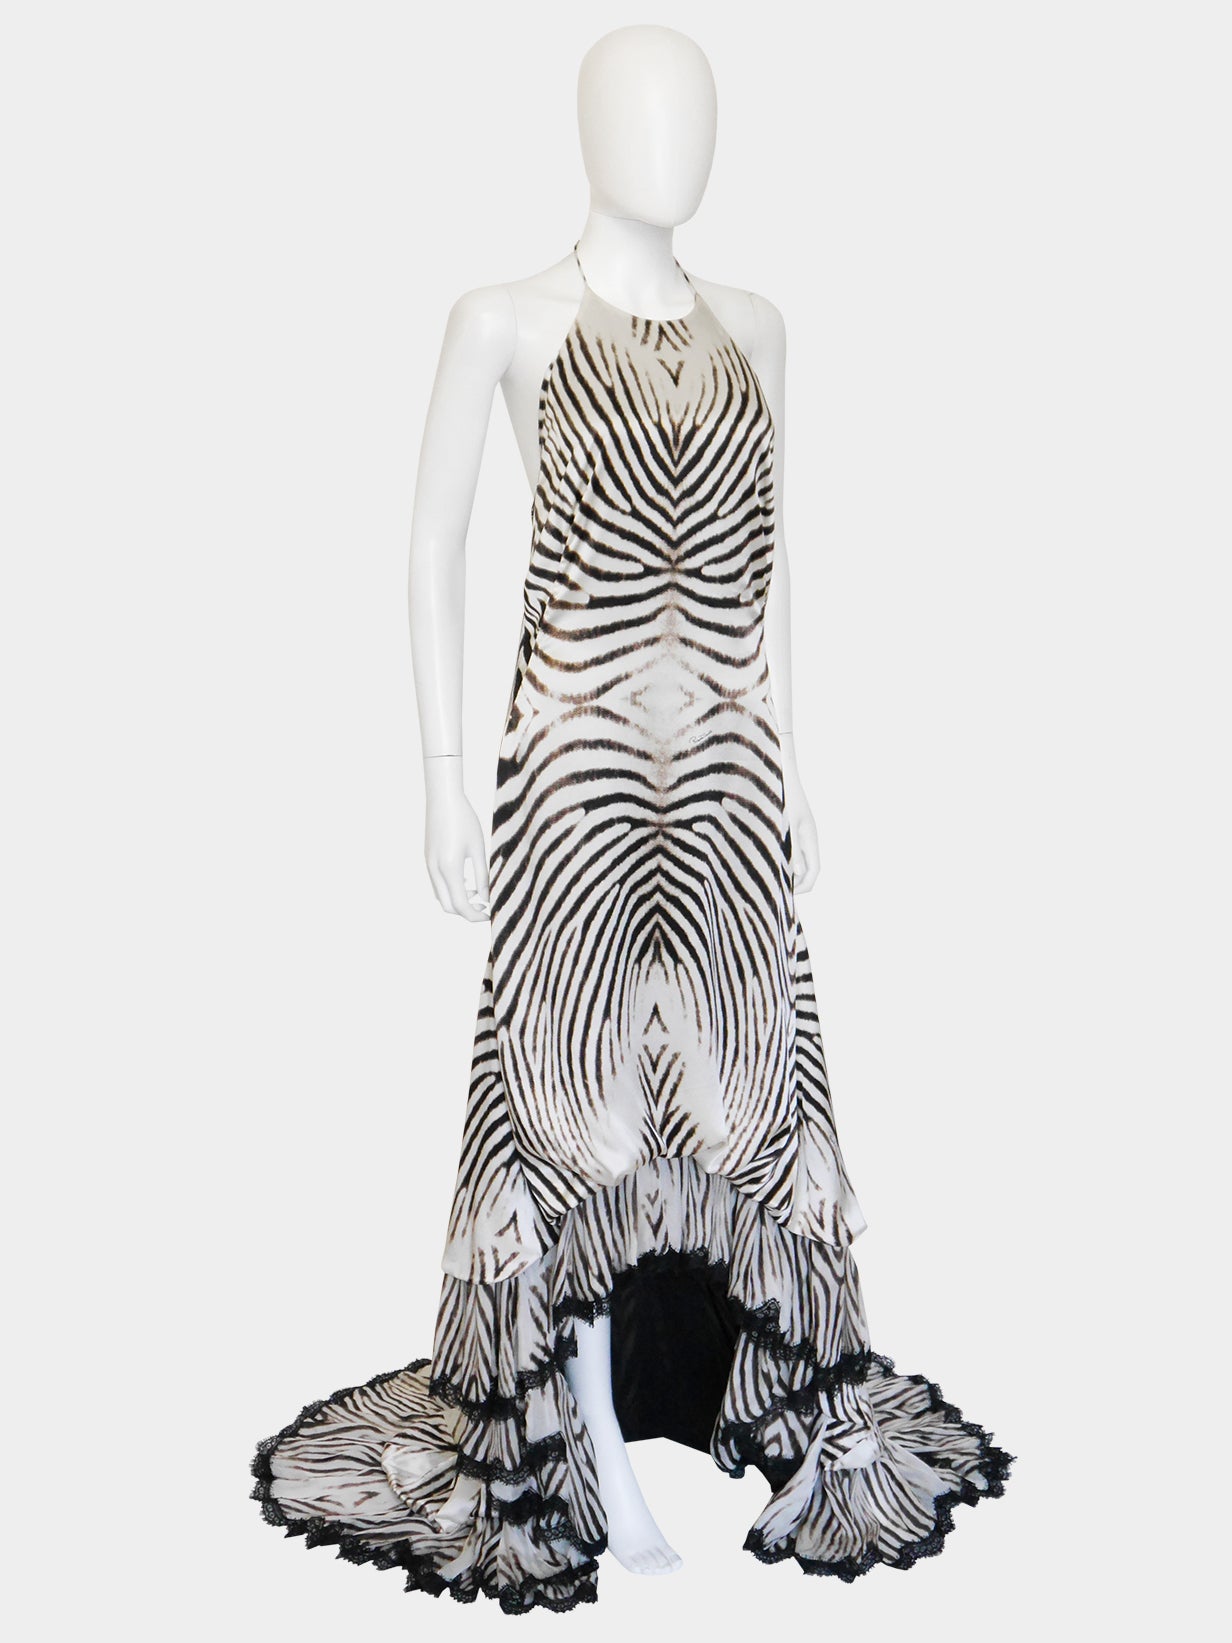 ROBERTO CAVALLI 2000s Vintage Backless Animal Print Silk Lace Evening Gown